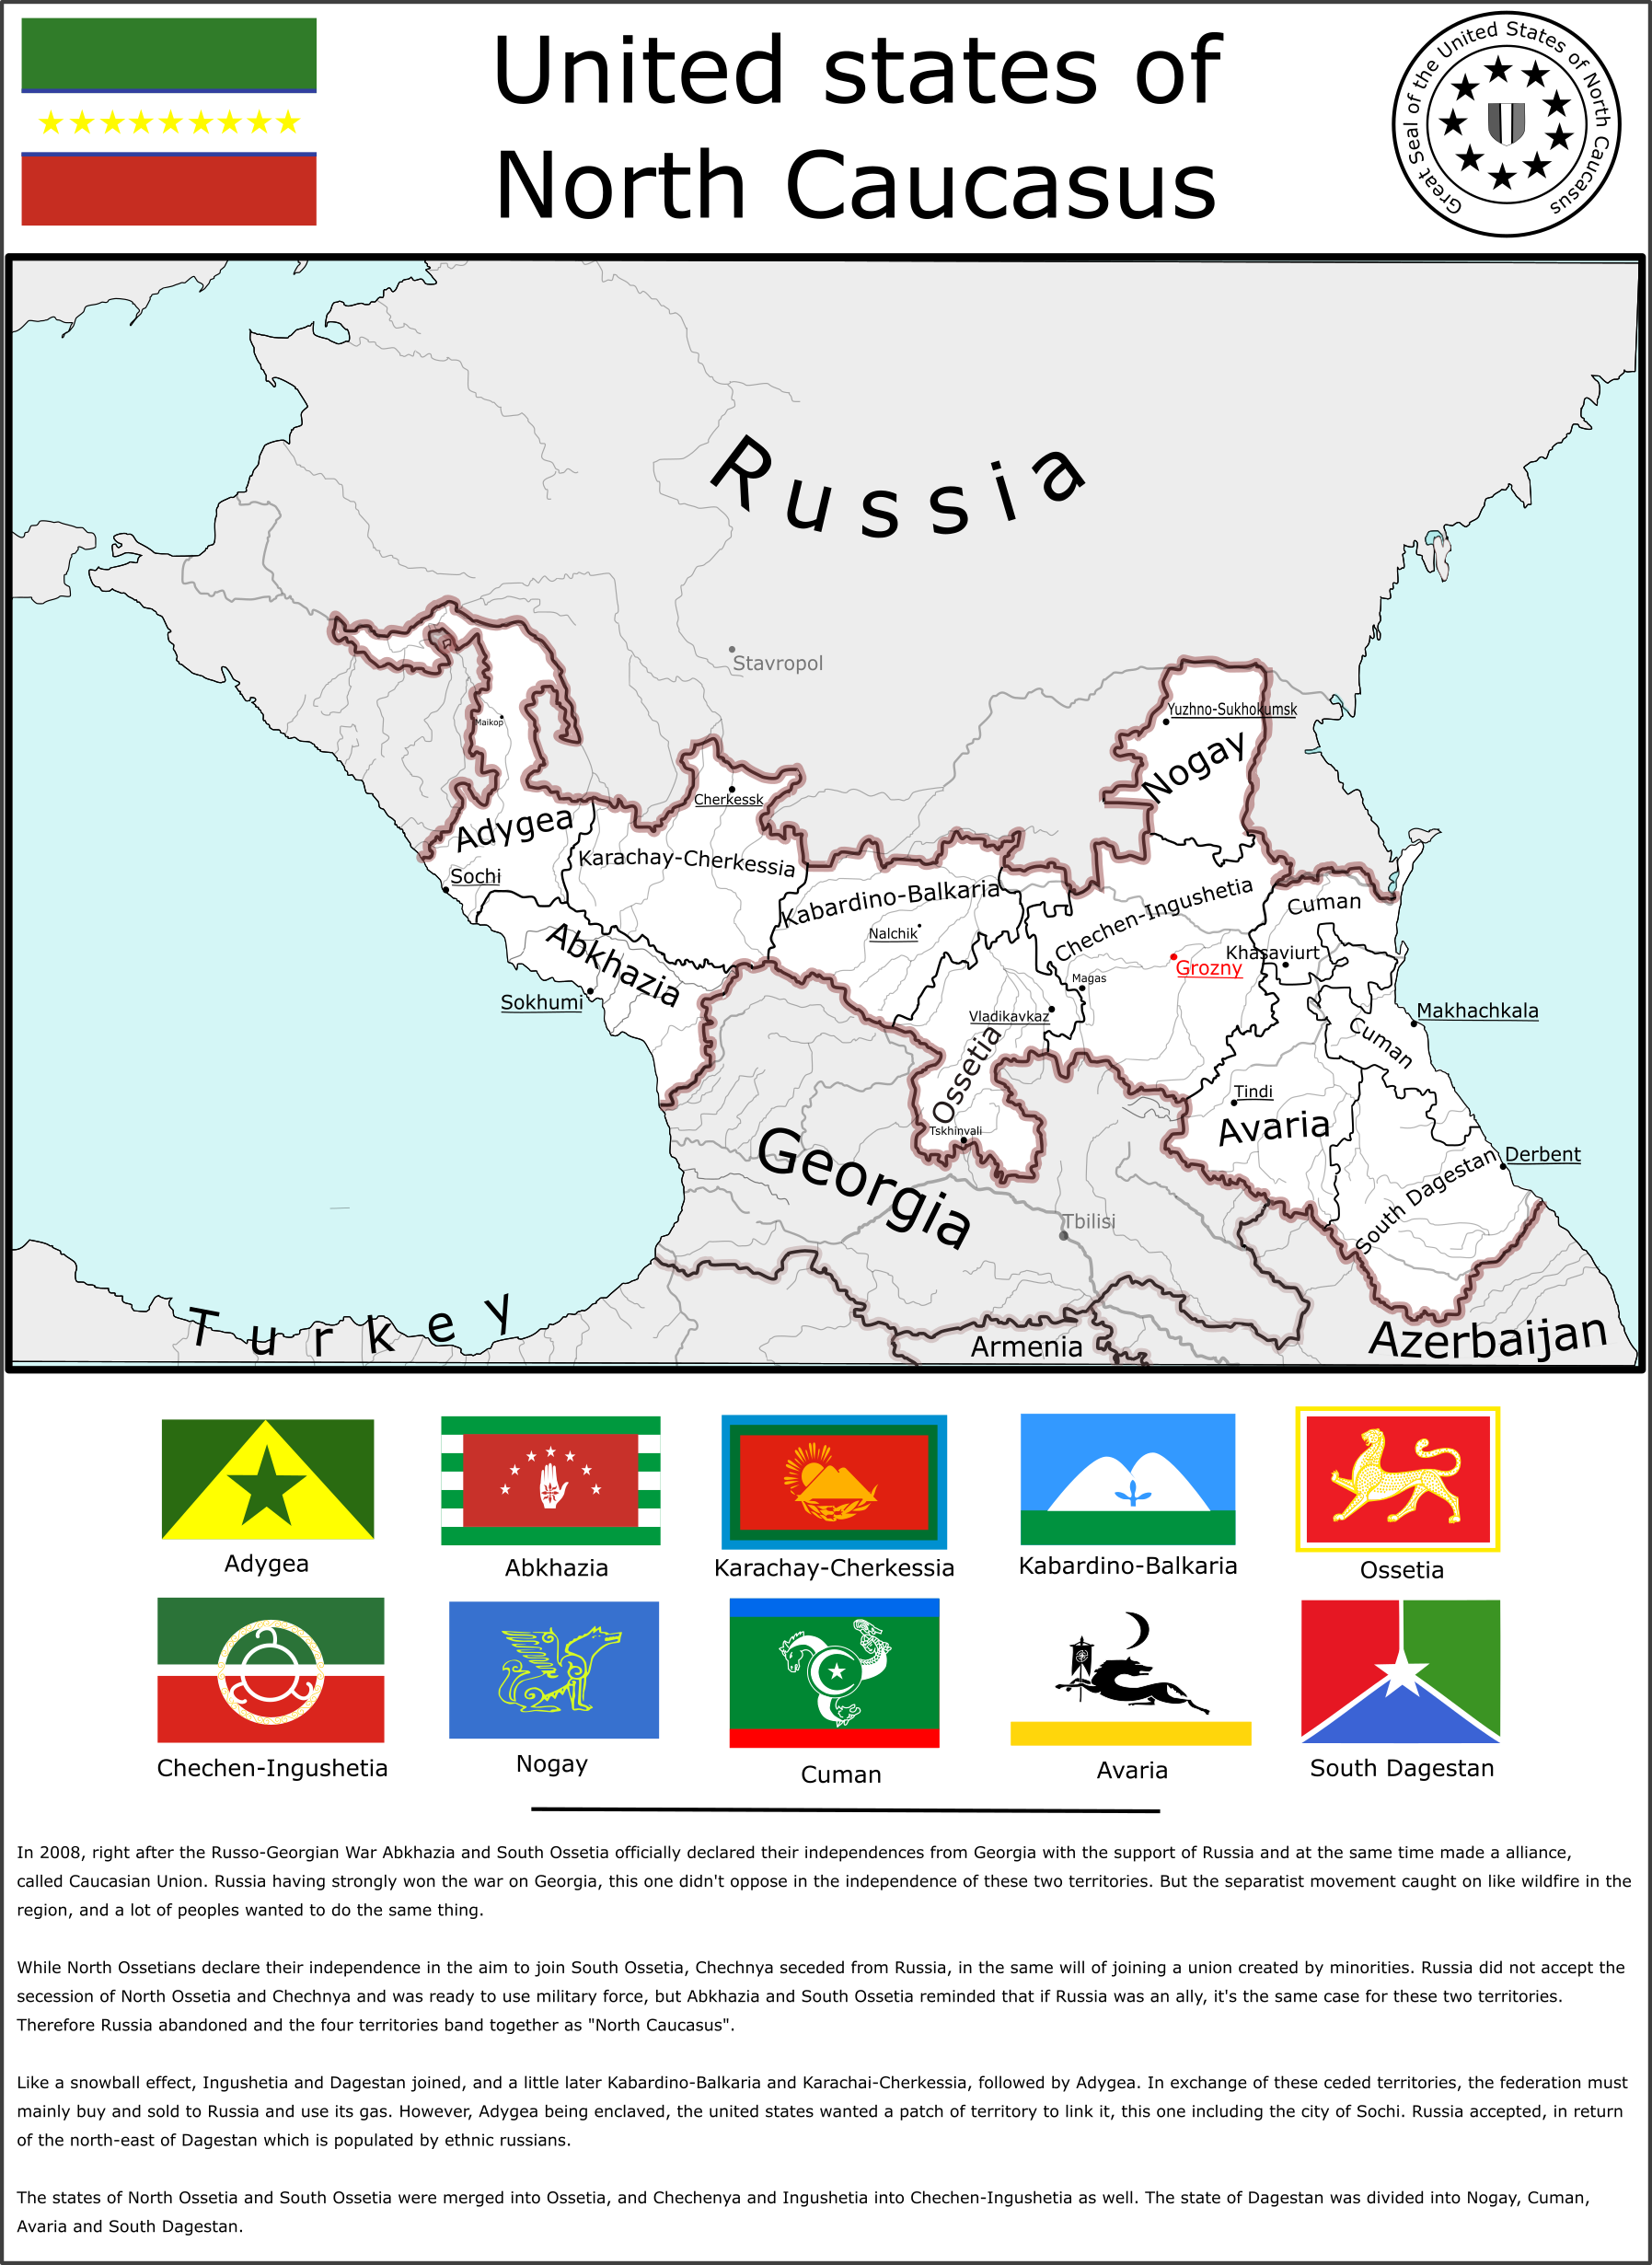 map_of_north_caucasus__second_version_by_coliop_kolchovo-db4ivvu.png 1.